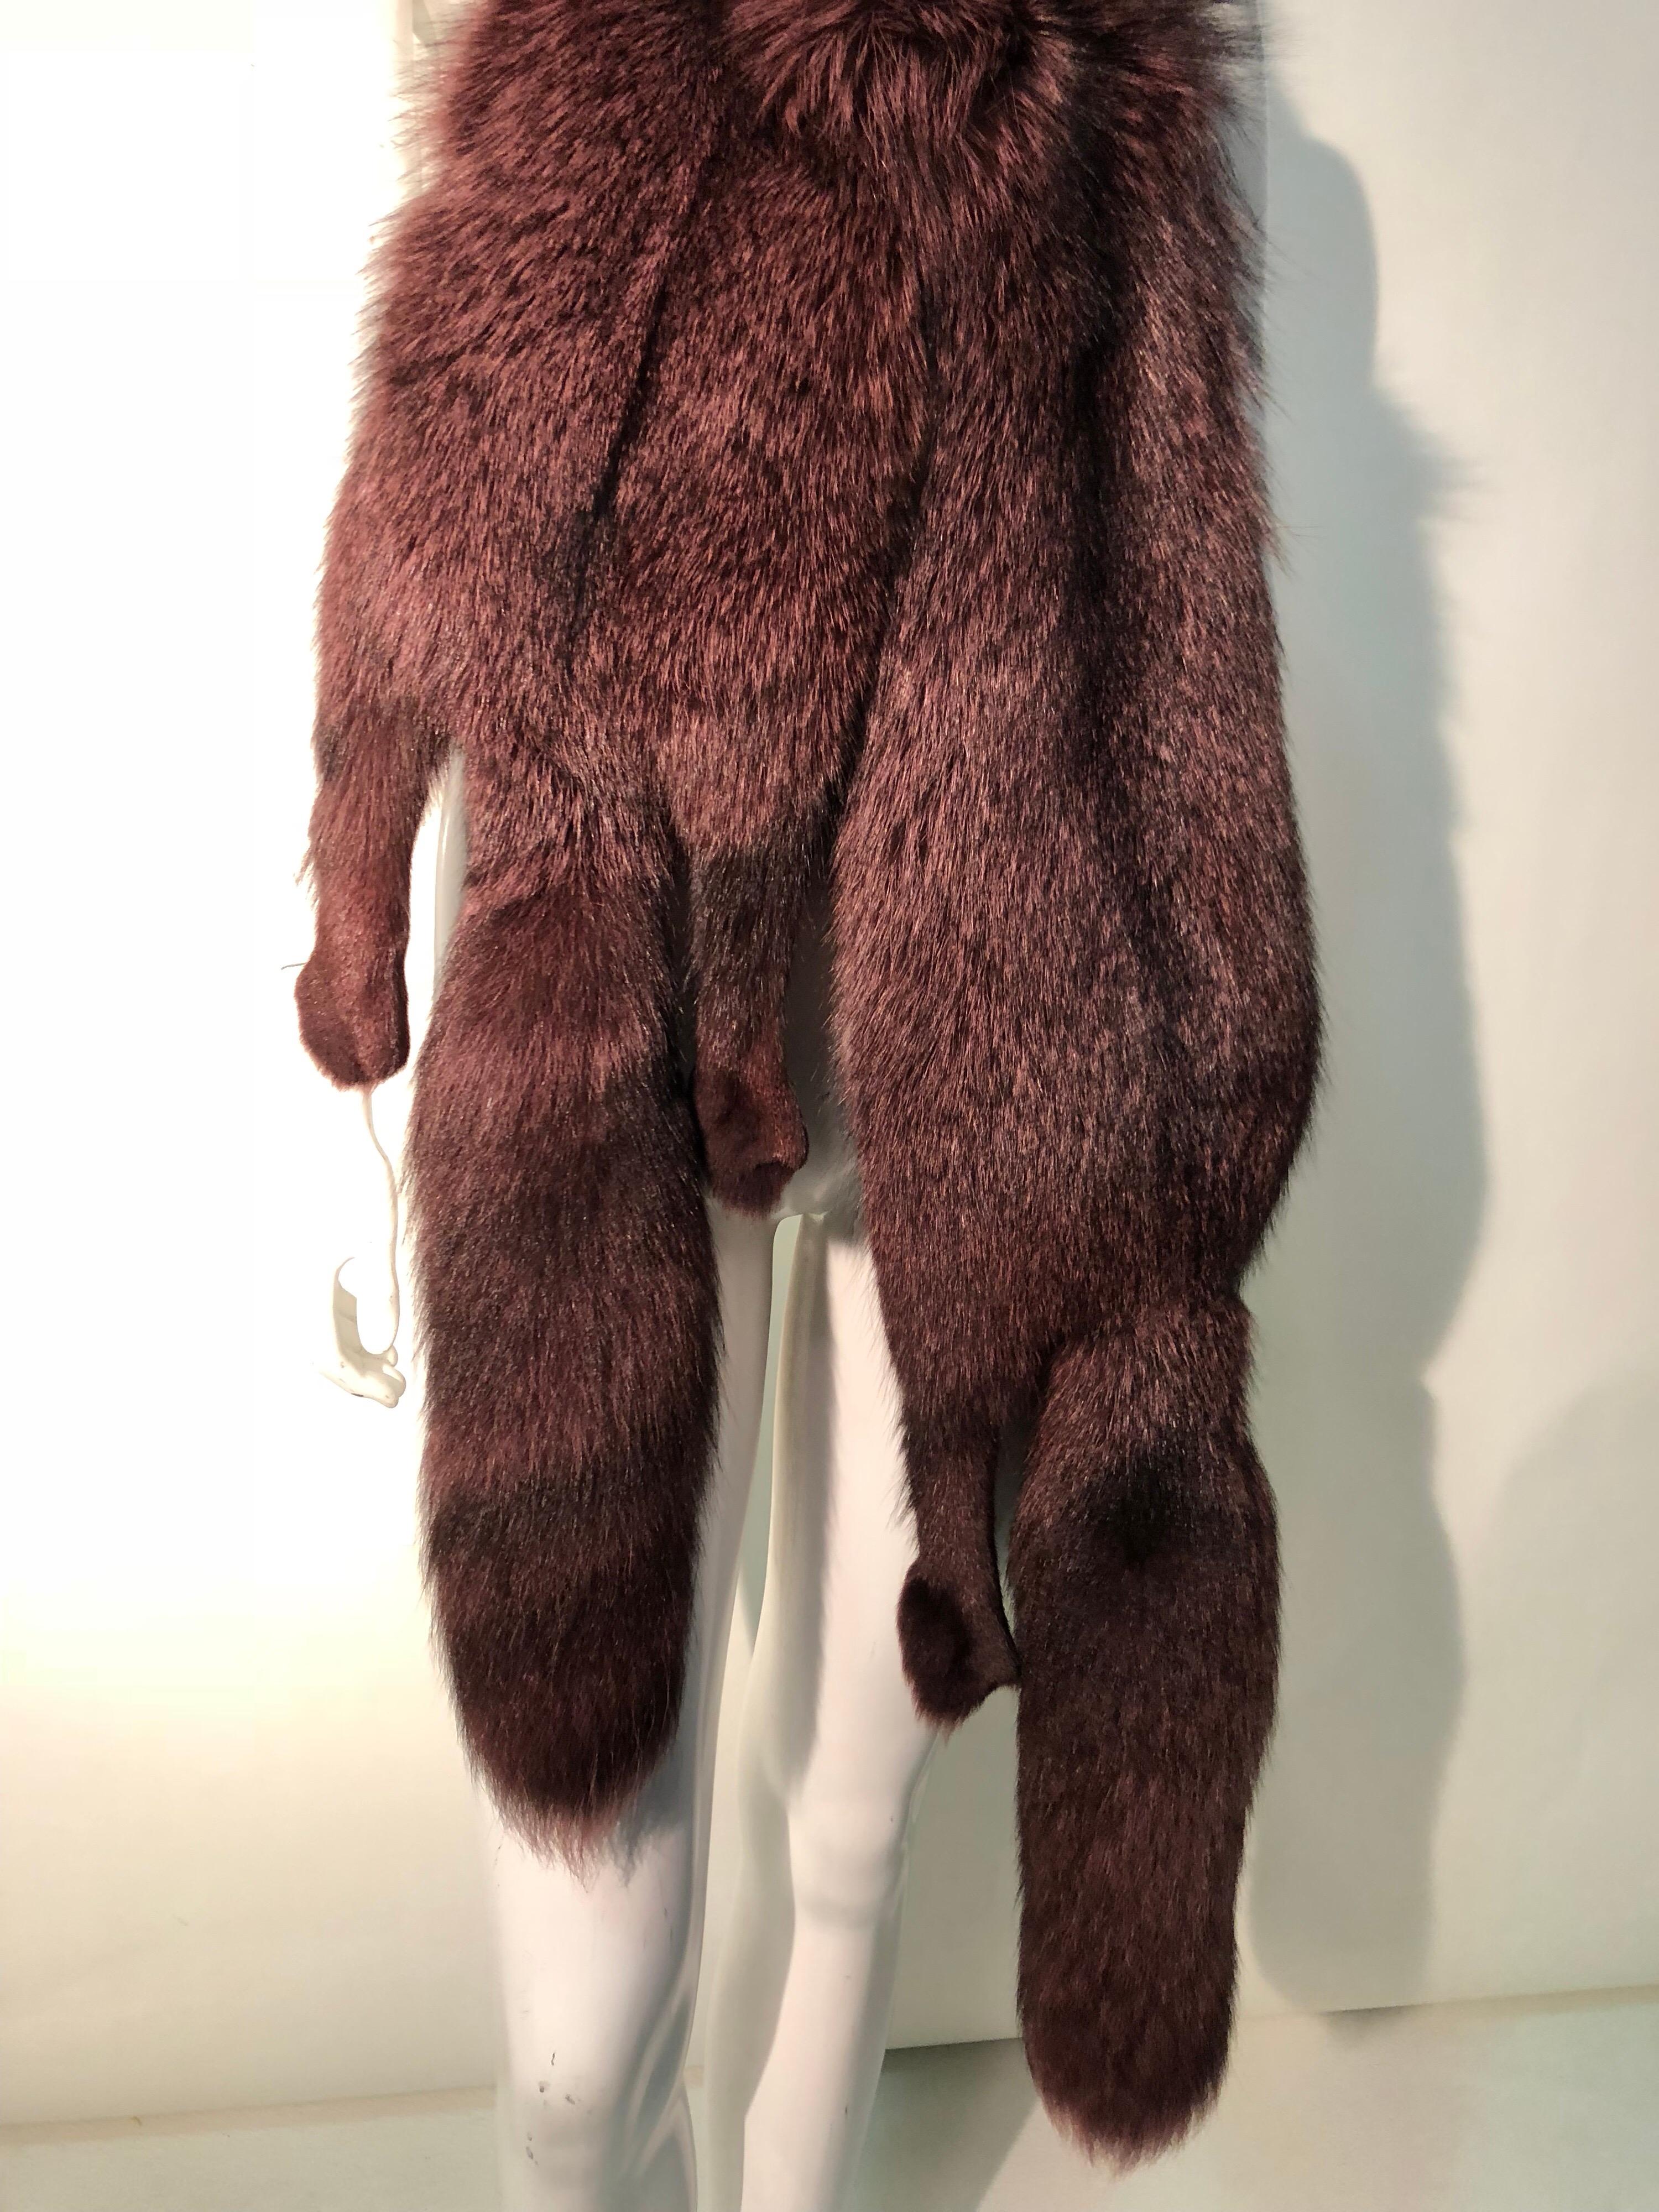 A fabulously luxurious 1980s double-pelt fox stole, over-dyed in mauve with one head that clasps at jaw, tails, eyes and paws (no claws). Quite dramatic and glamorous! 